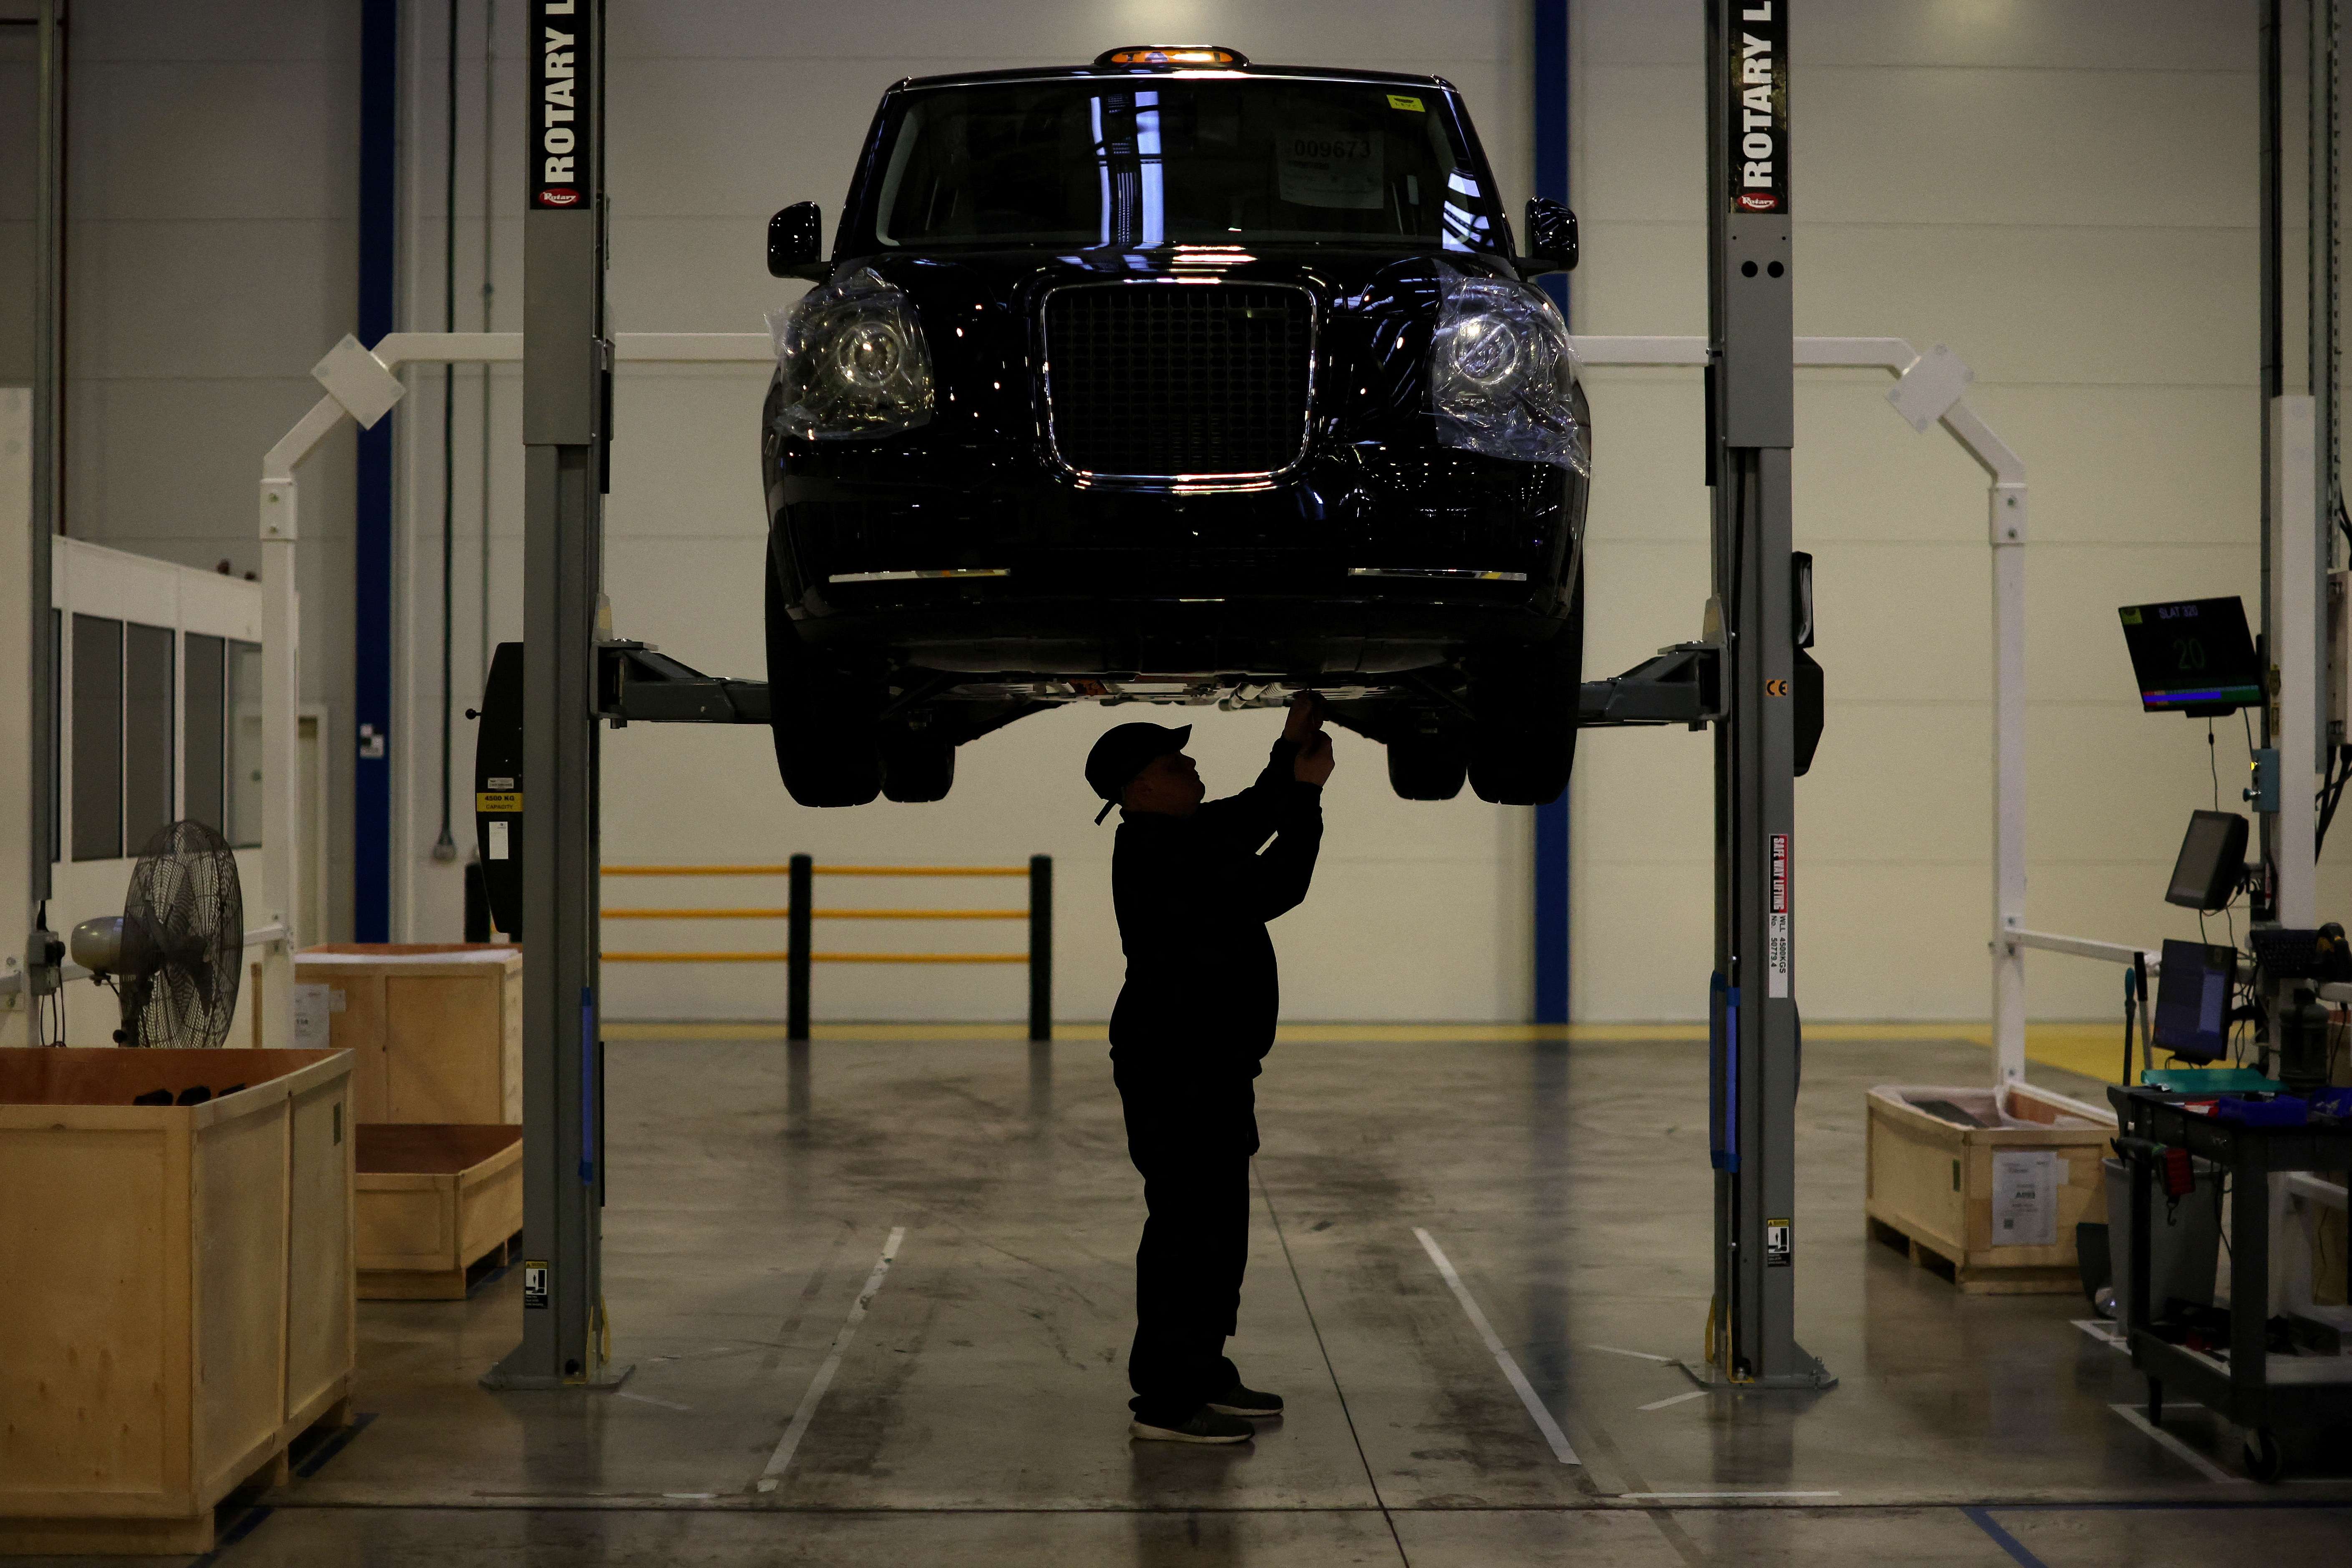 A worker stands under a TX electric taxi inside the LEVC (London Electric Motor Company) factory in Coventry